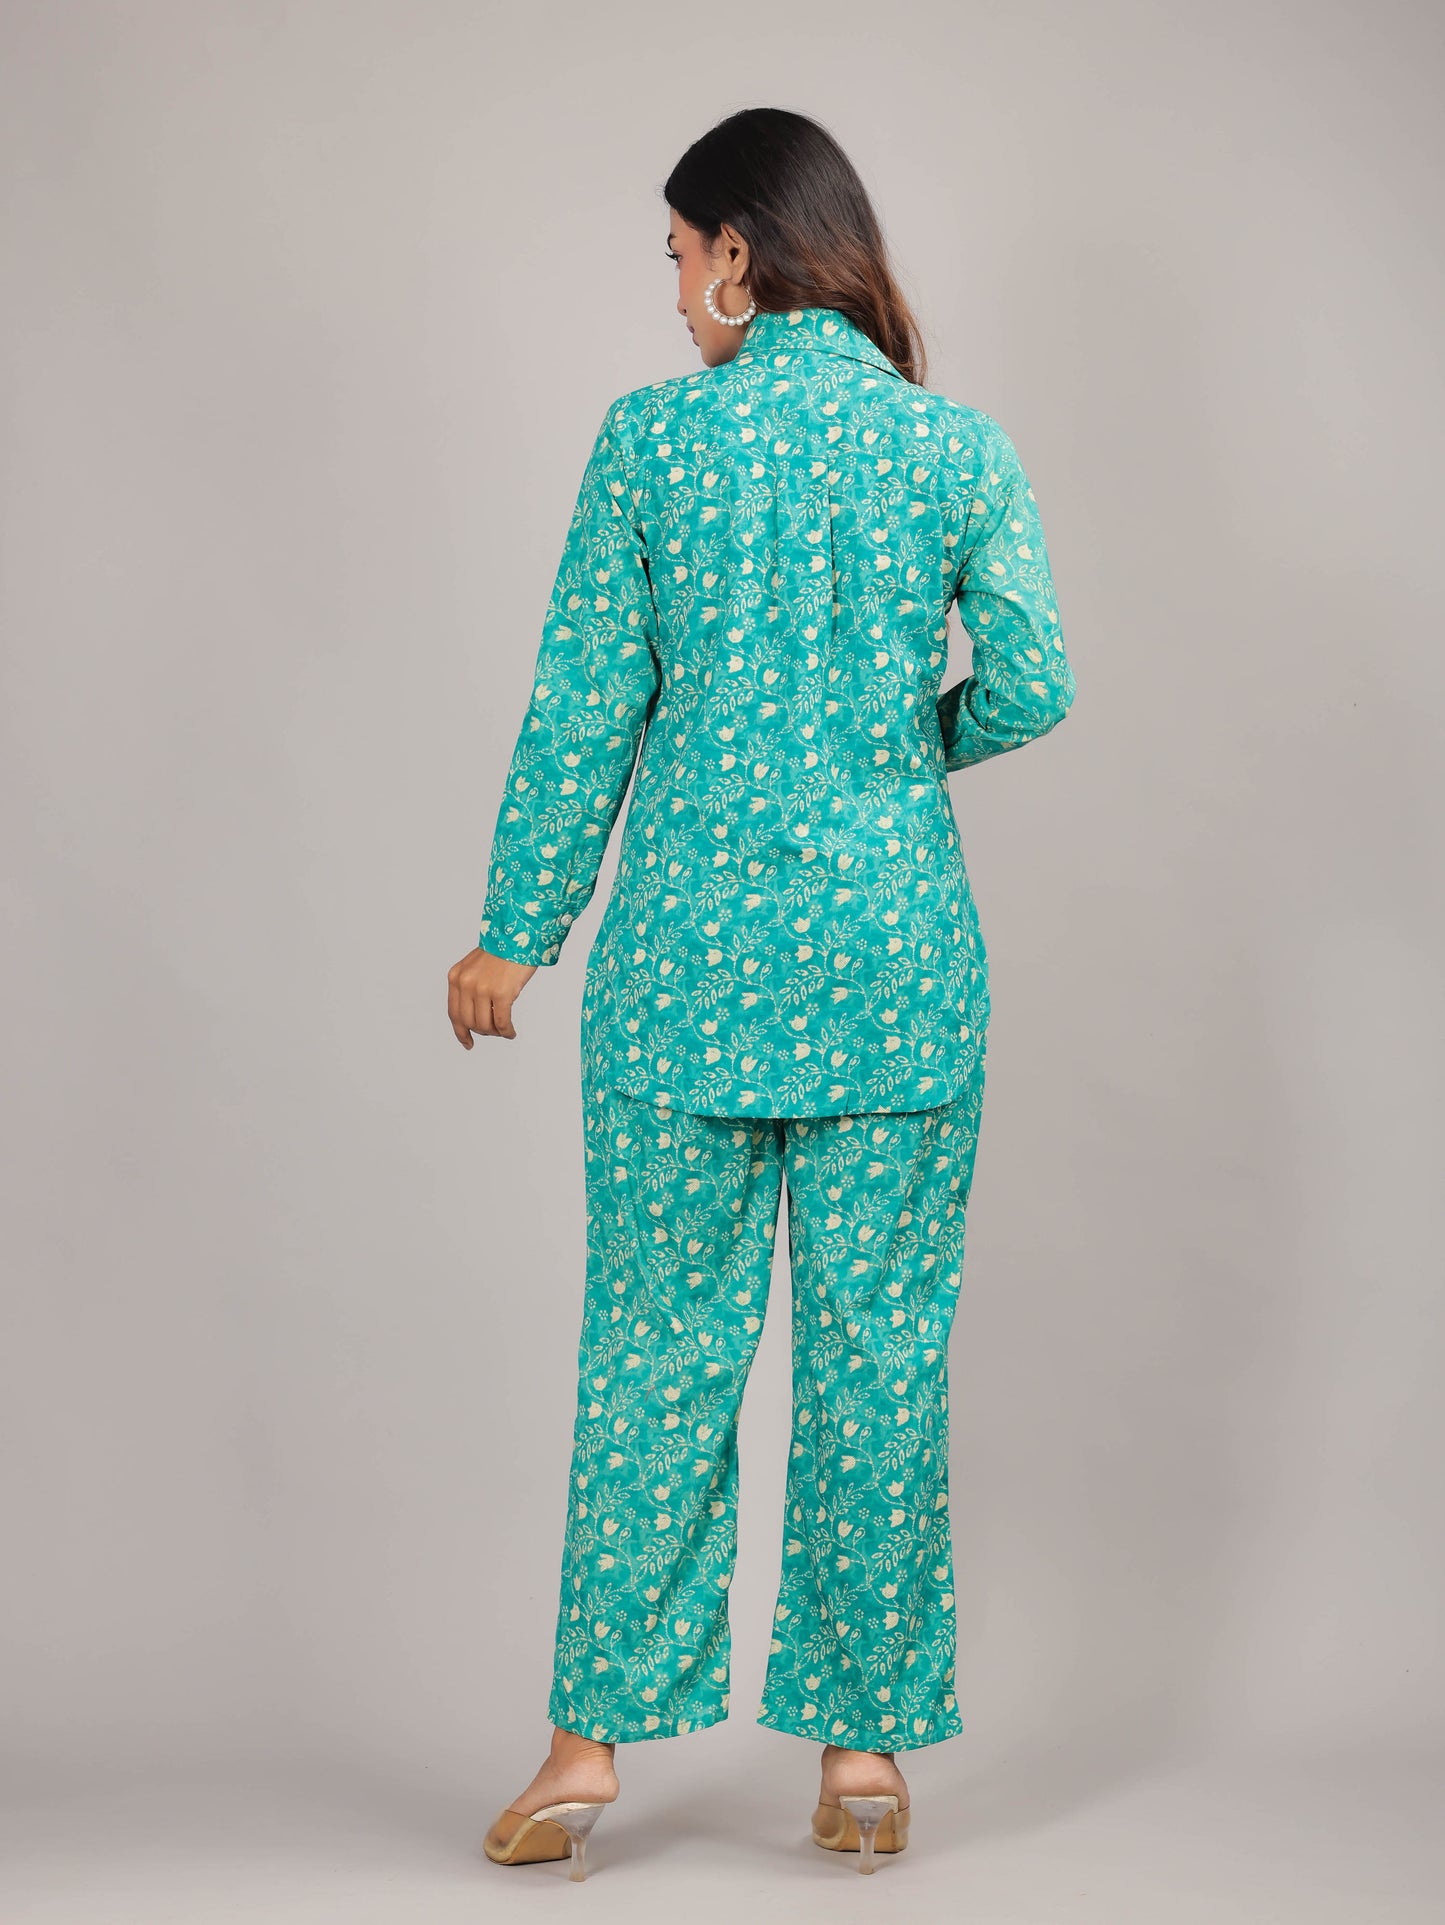 Floral Print on Teal Cotton Shirt Set for Women